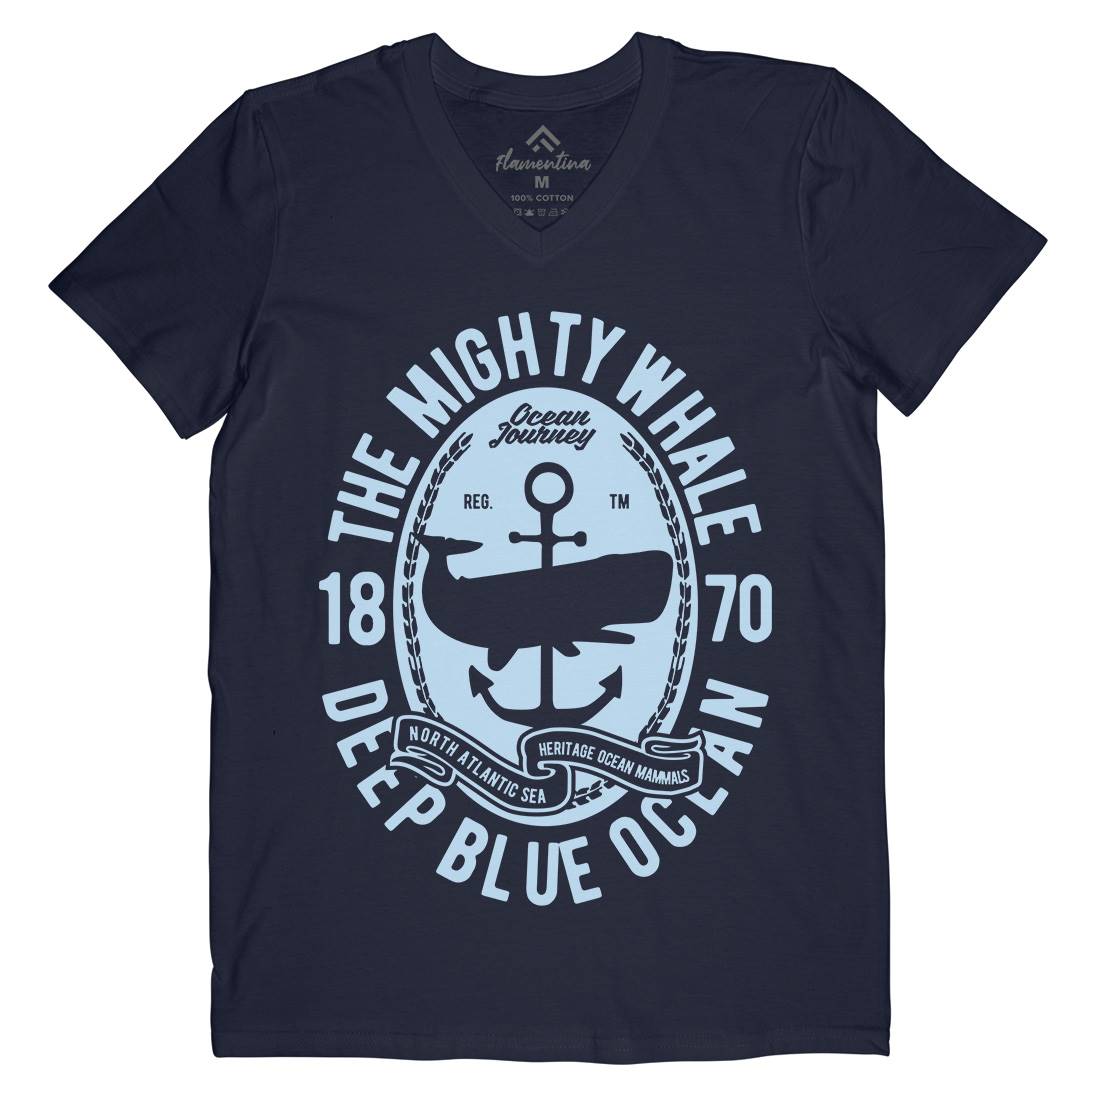 The Mighty Whale Mens V-Neck T-Shirt Navy B466